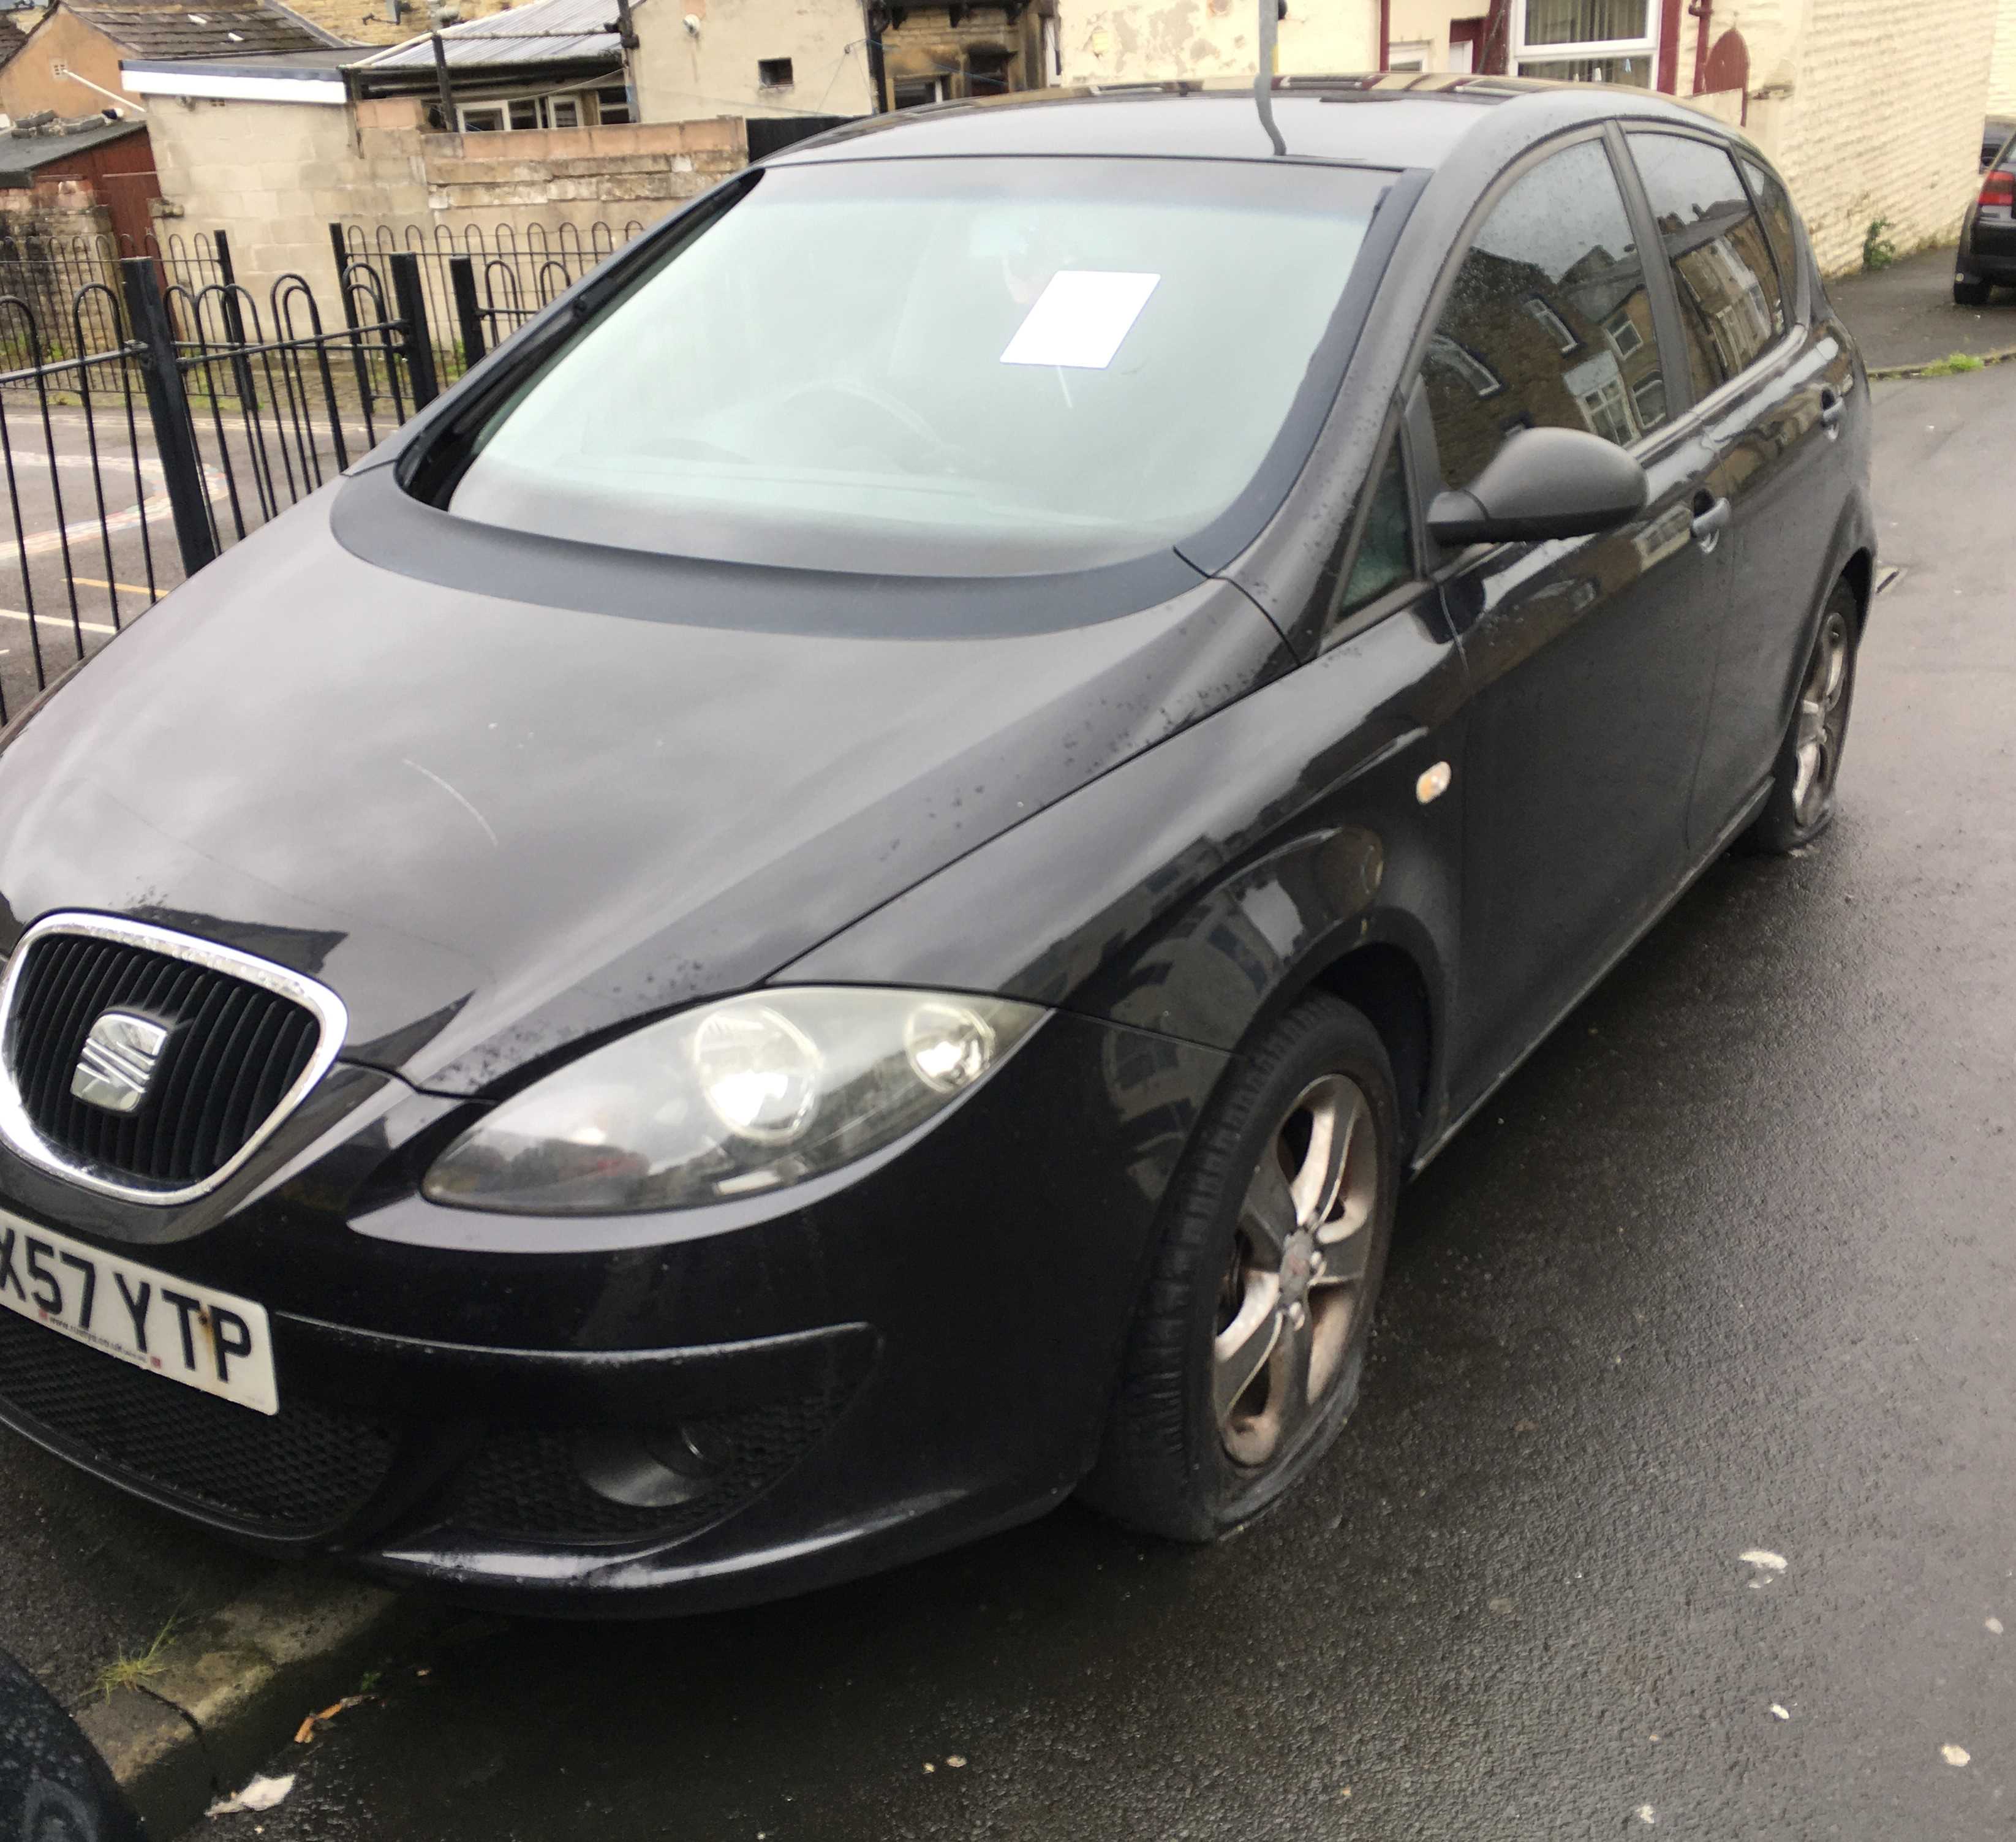 Owner of abandoned car fined £710